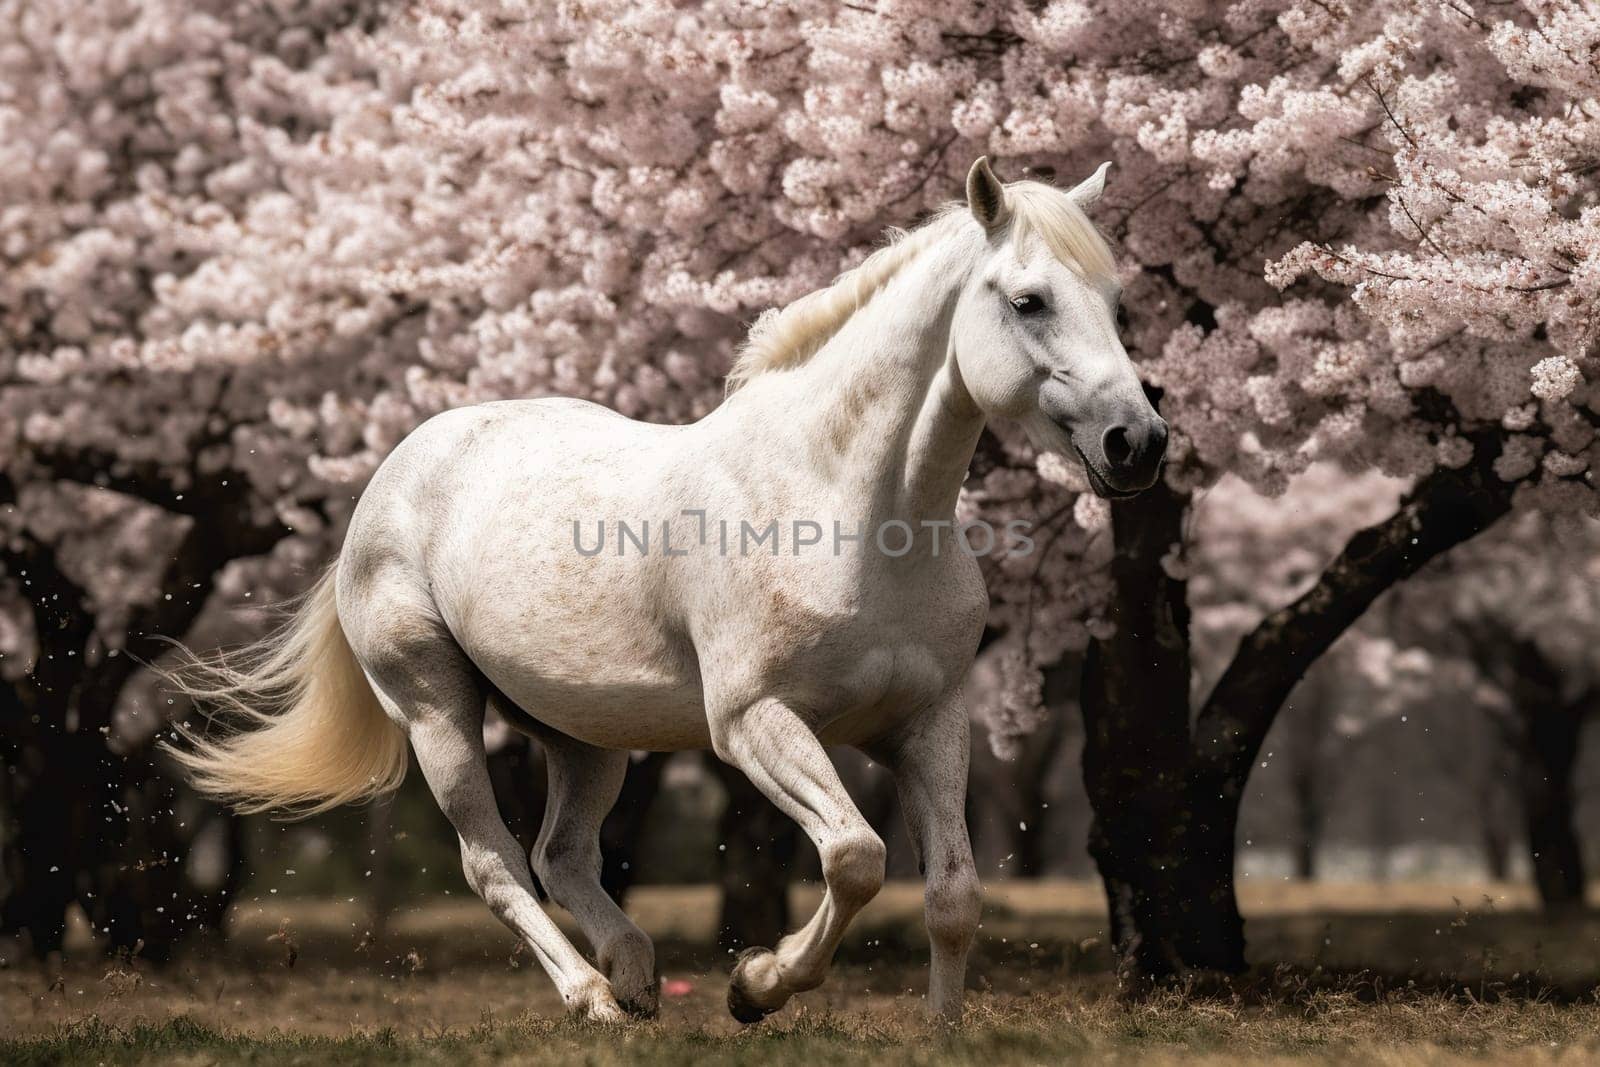 Horse Running Fast Against Blooming Cherry Blossoms by tan4ikk1